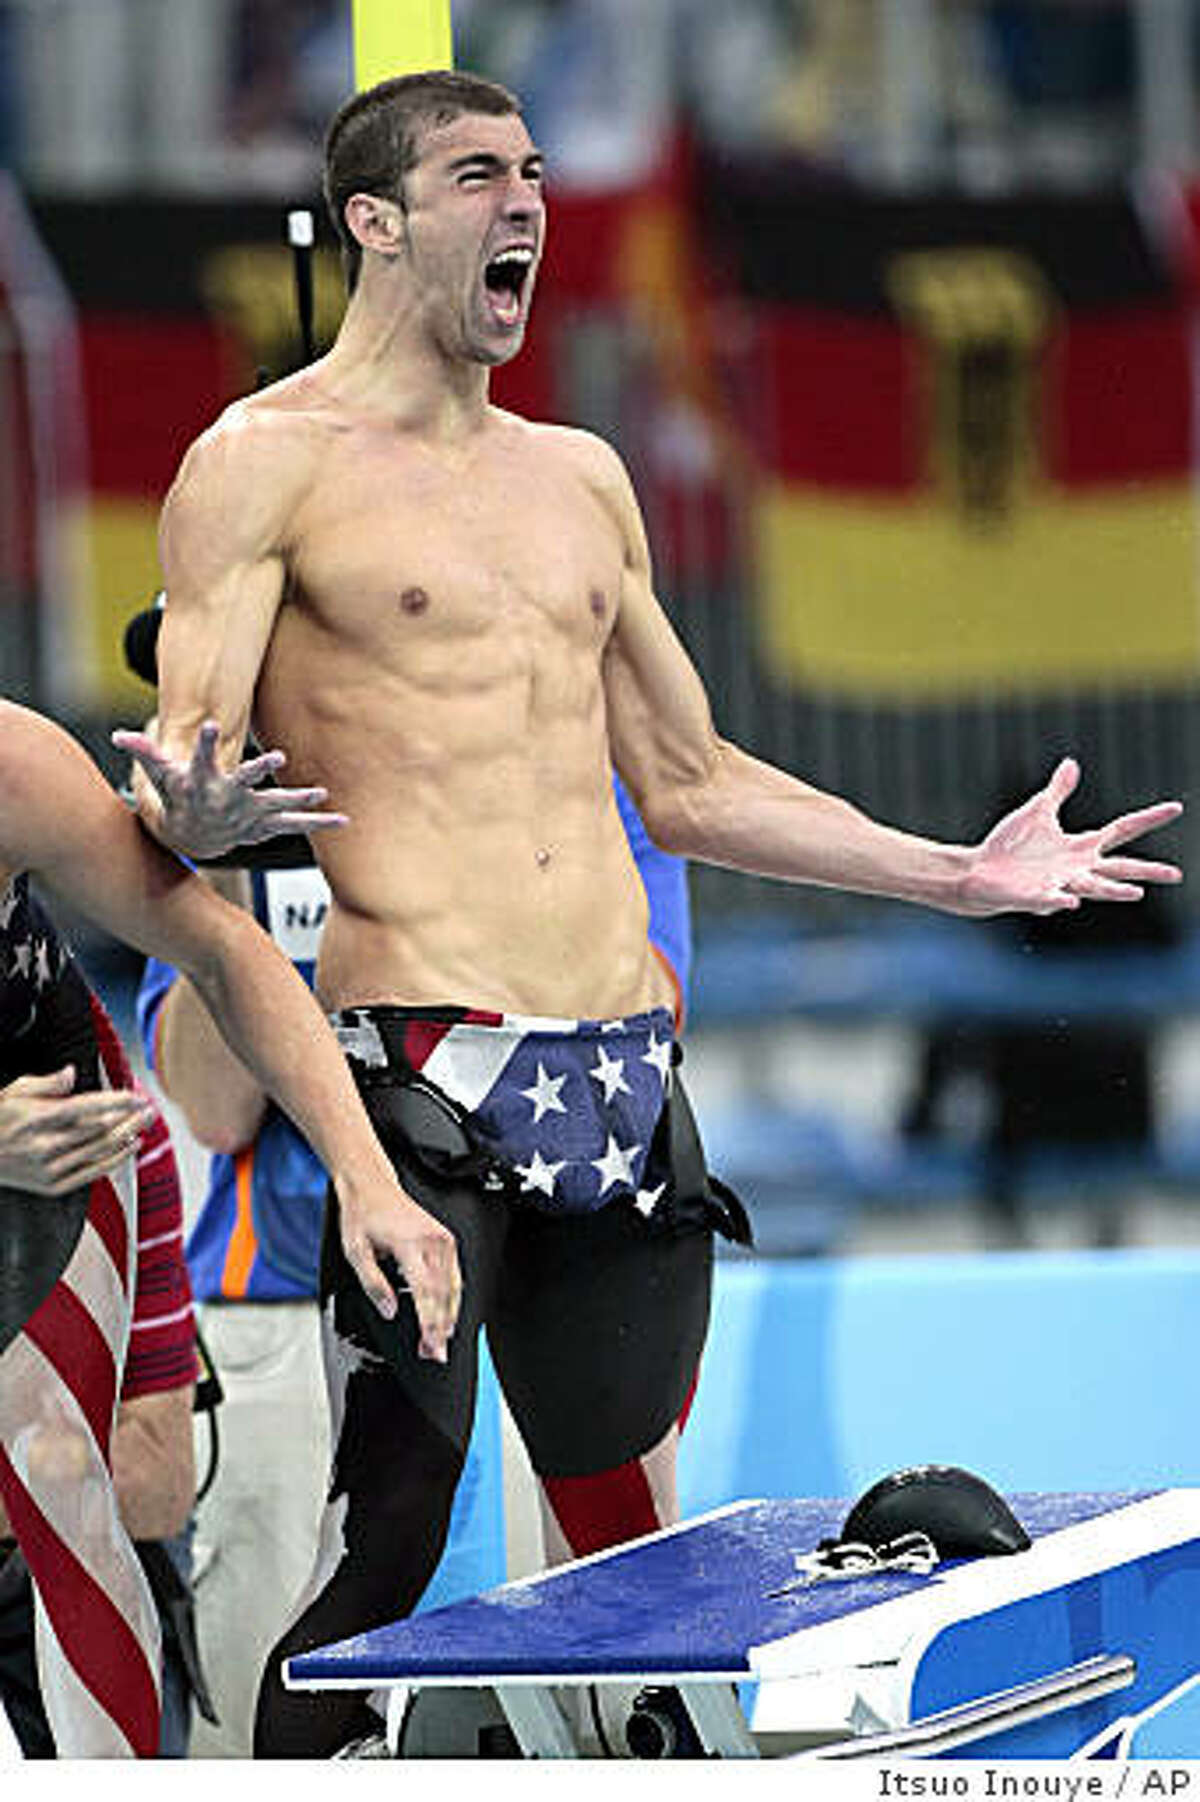 United States' Michael Phelps celebrates as U.S. wins the gold in the men's 4x100-meter freestyle relay during the swimming competitions in the National Aquatics Center at the Beijing 2008 Olympics in Beijing, Monday, Aug. 11, 2008. (AP Photo/Itsuo Inouye)